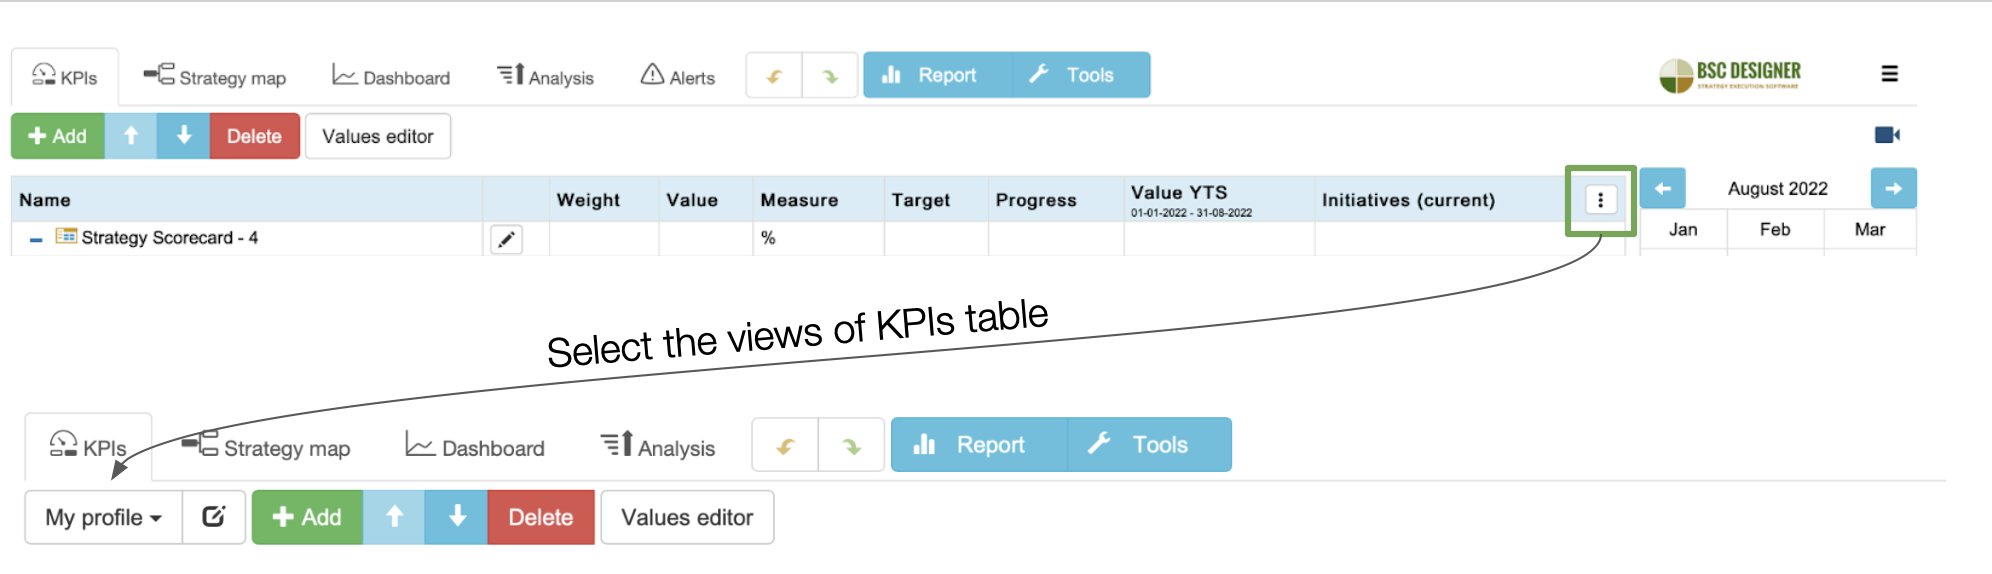 A quick selection of the view for KPIs table